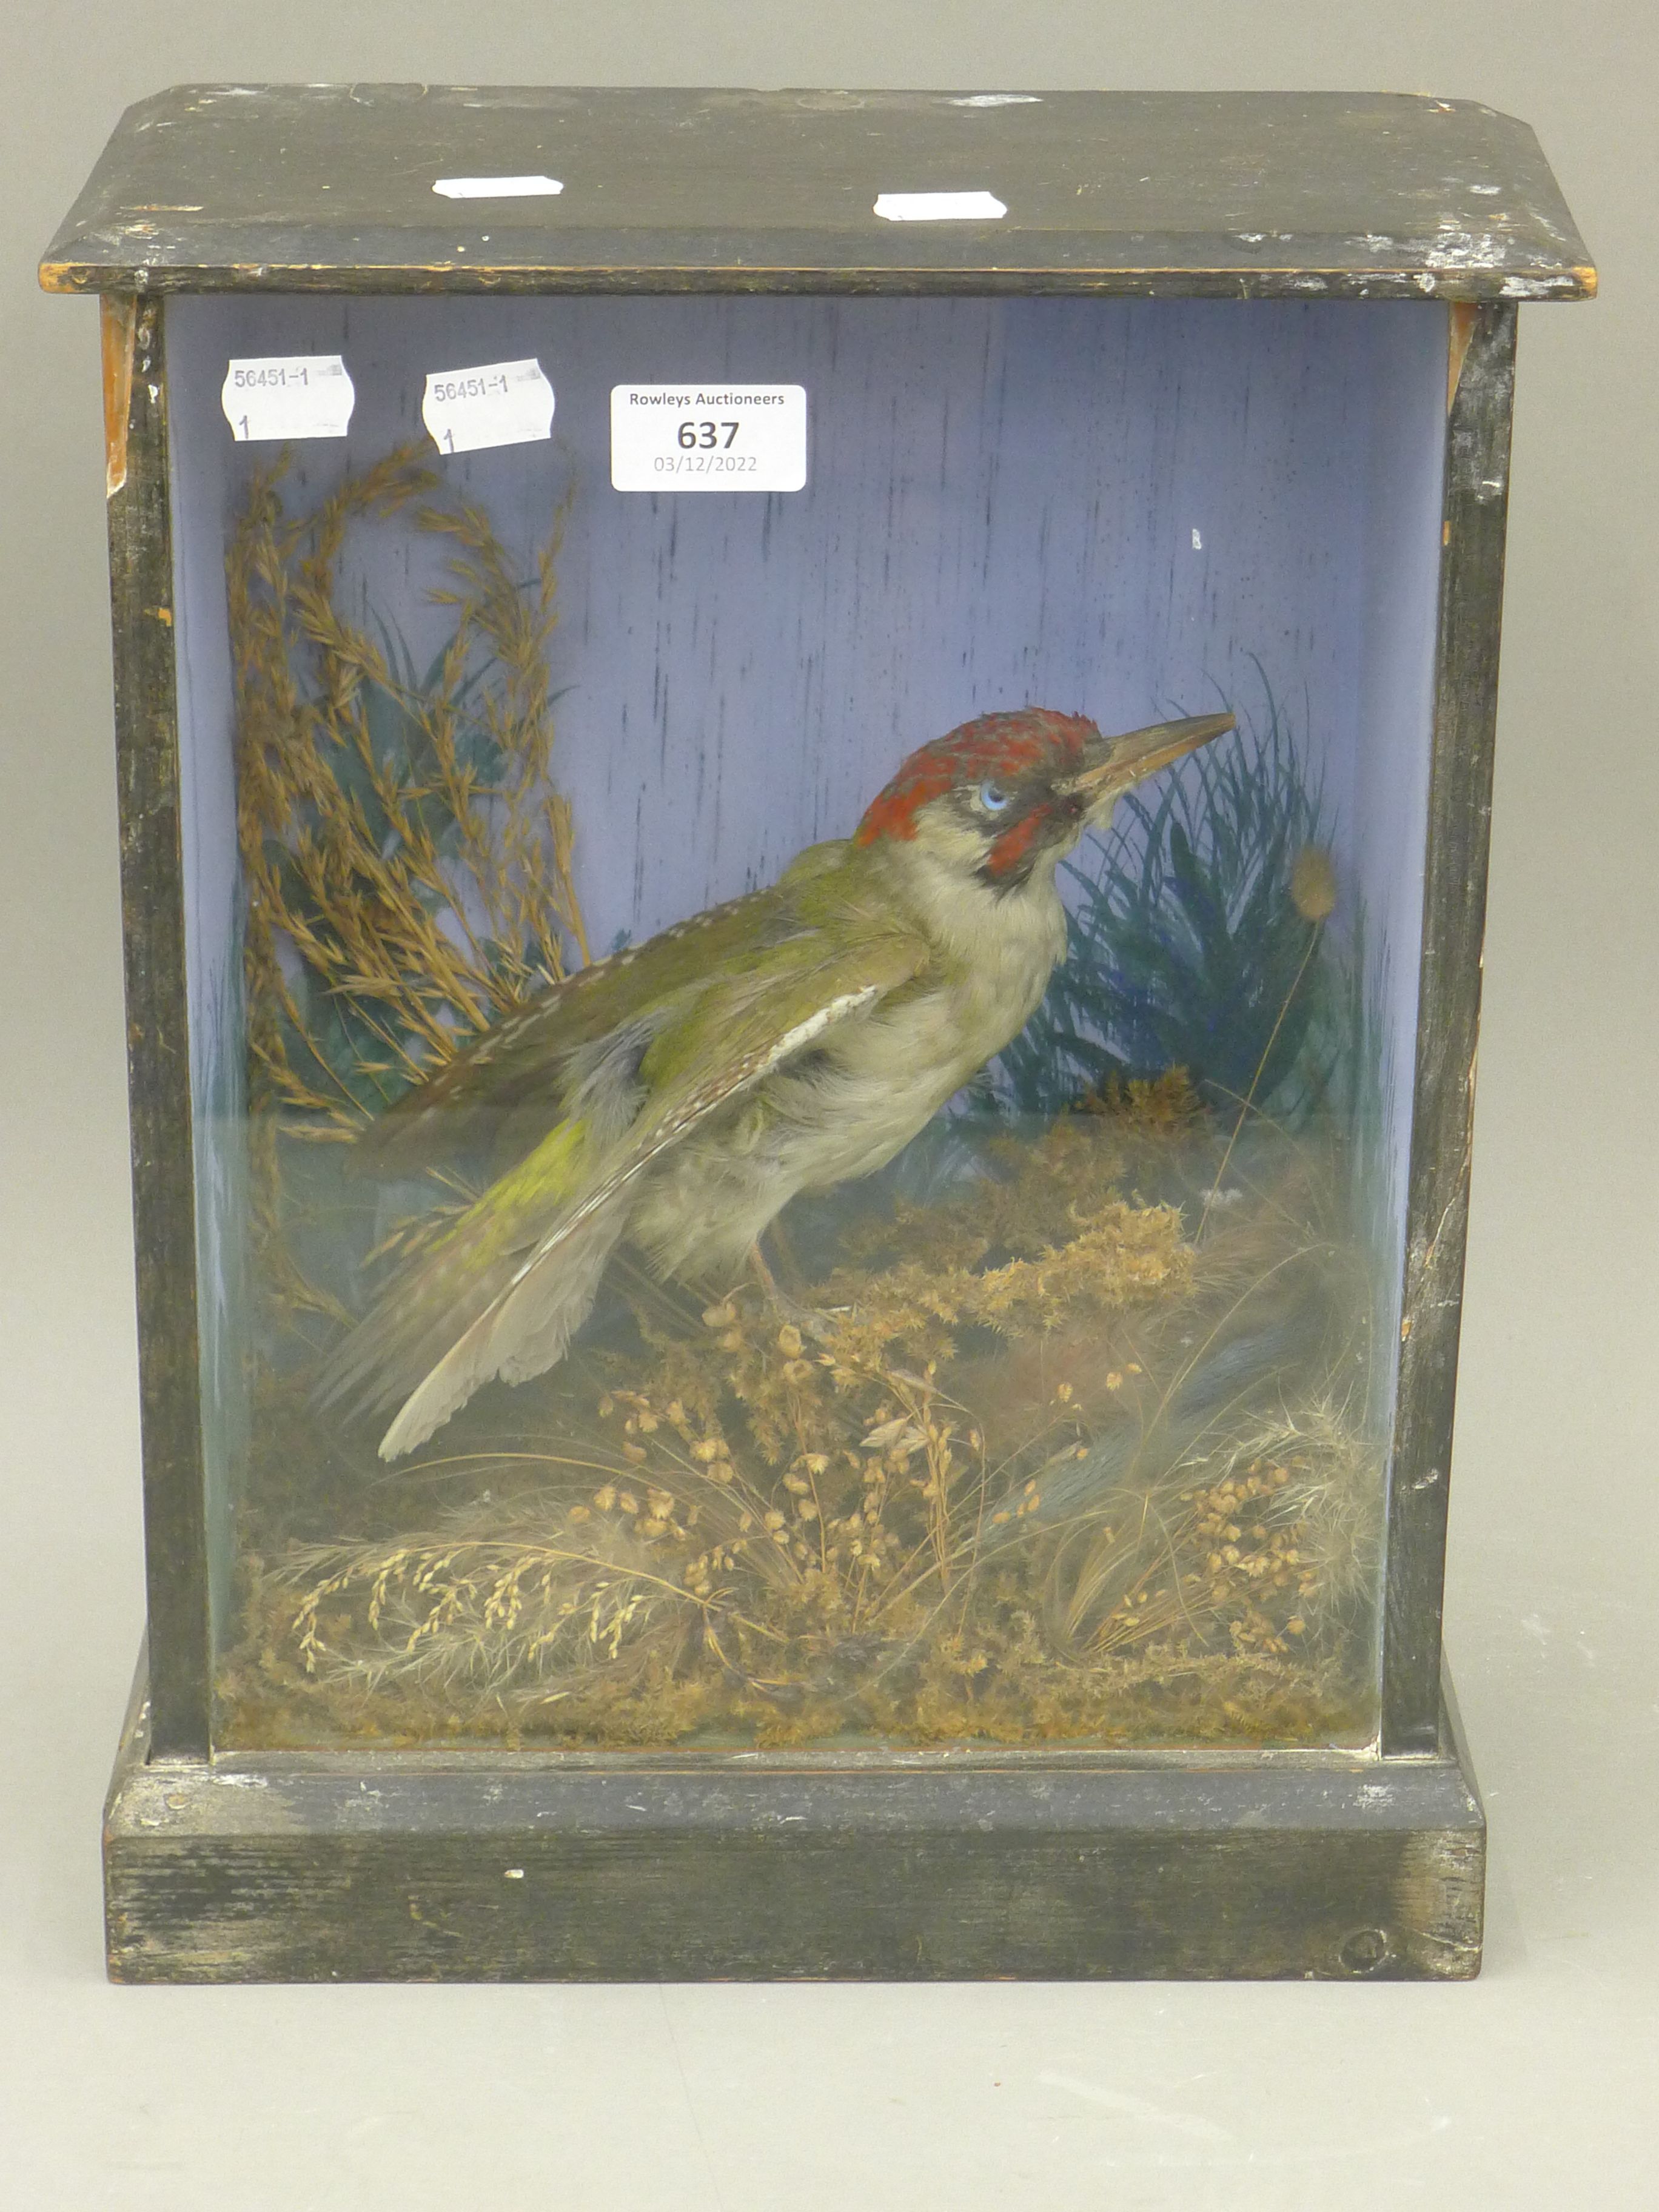 A taxidermy specimen of a preserved Green woodpecker (Picus viridis) in a wooden and glazed case.